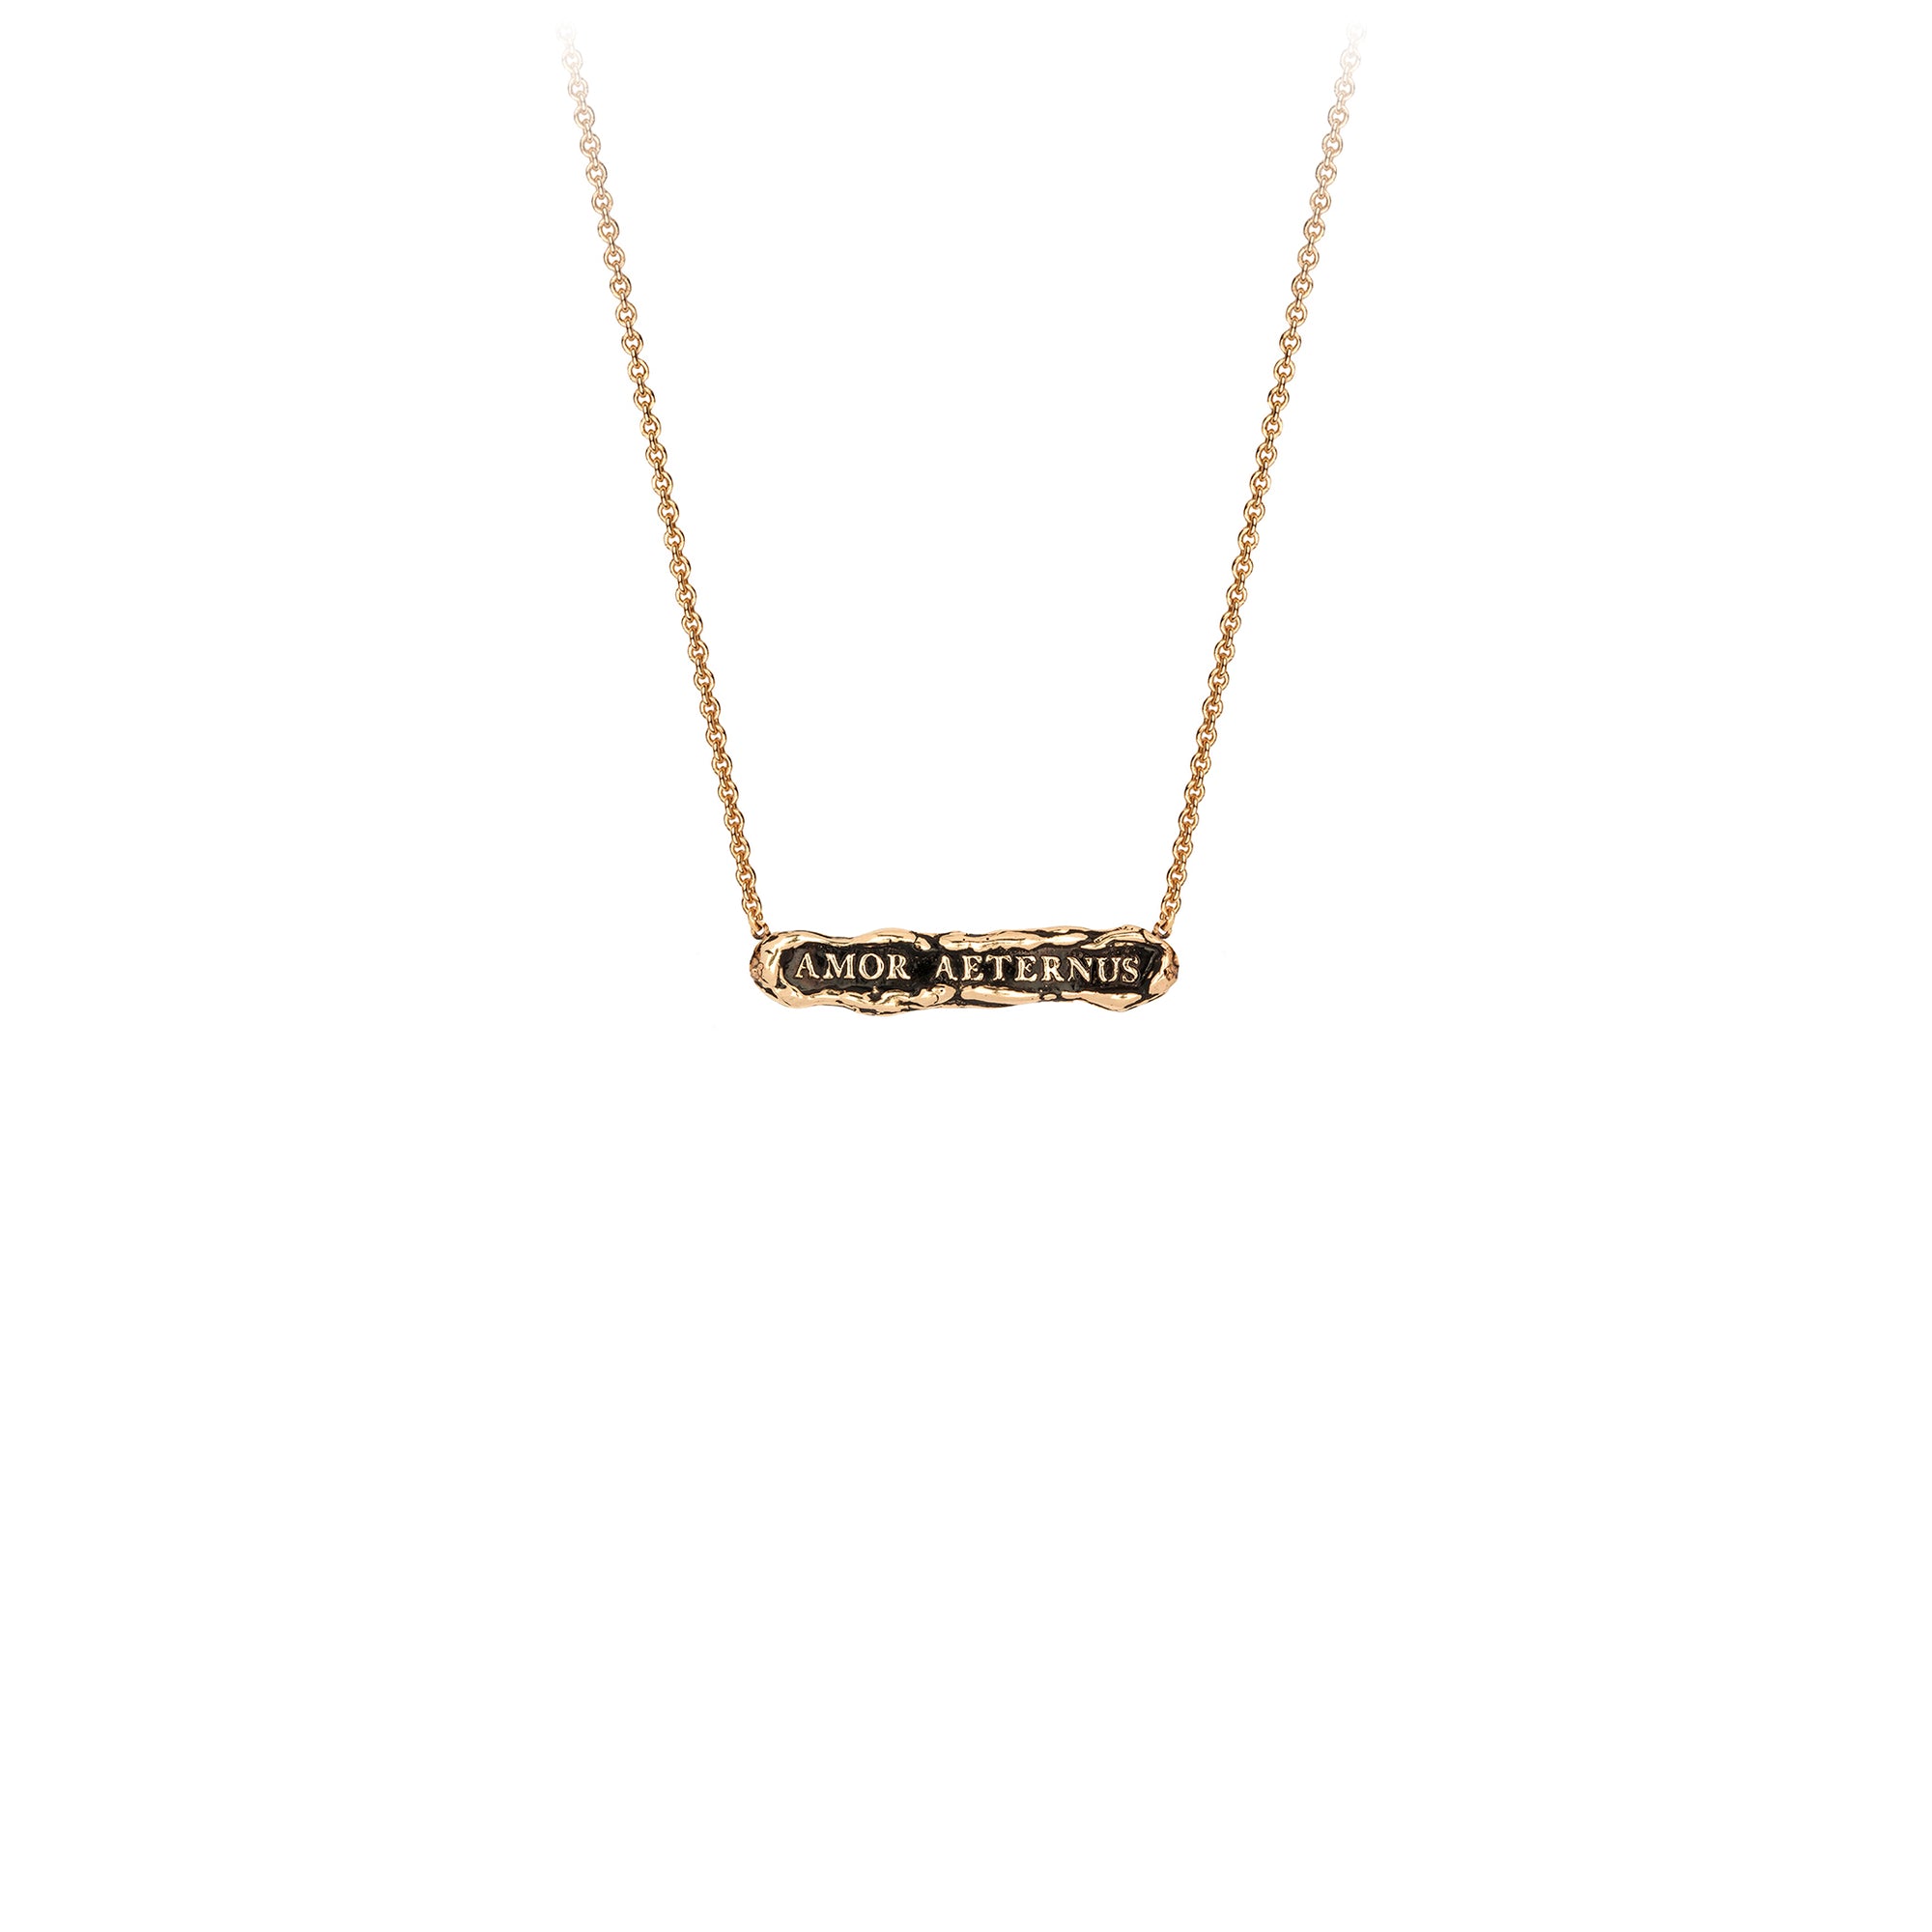 A 14k gold chain featuring a gold bar with our Amor Aeternus engraving.